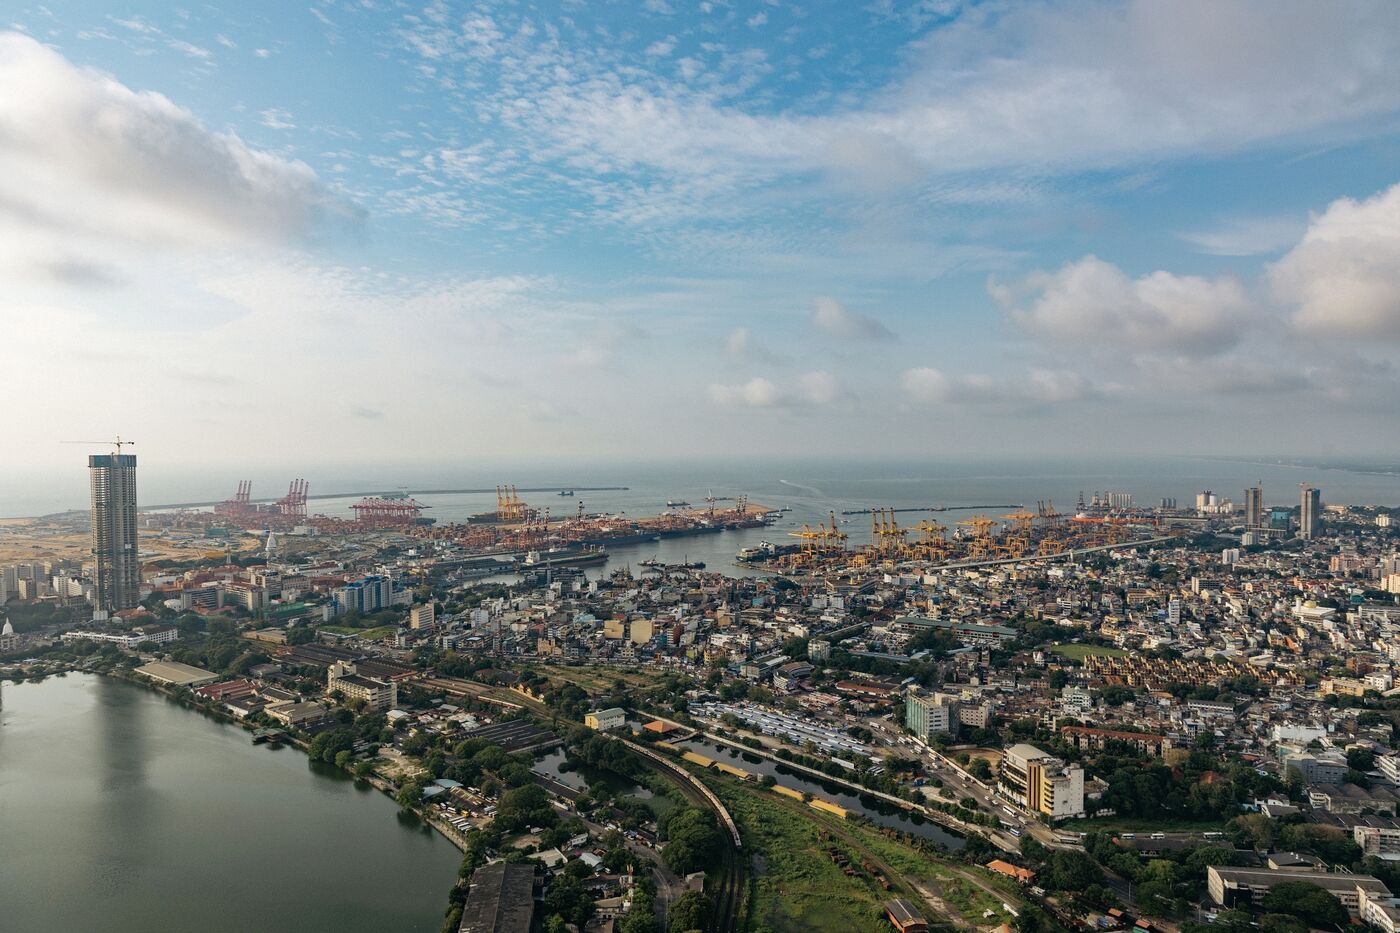 Colombo Port and International Financial City